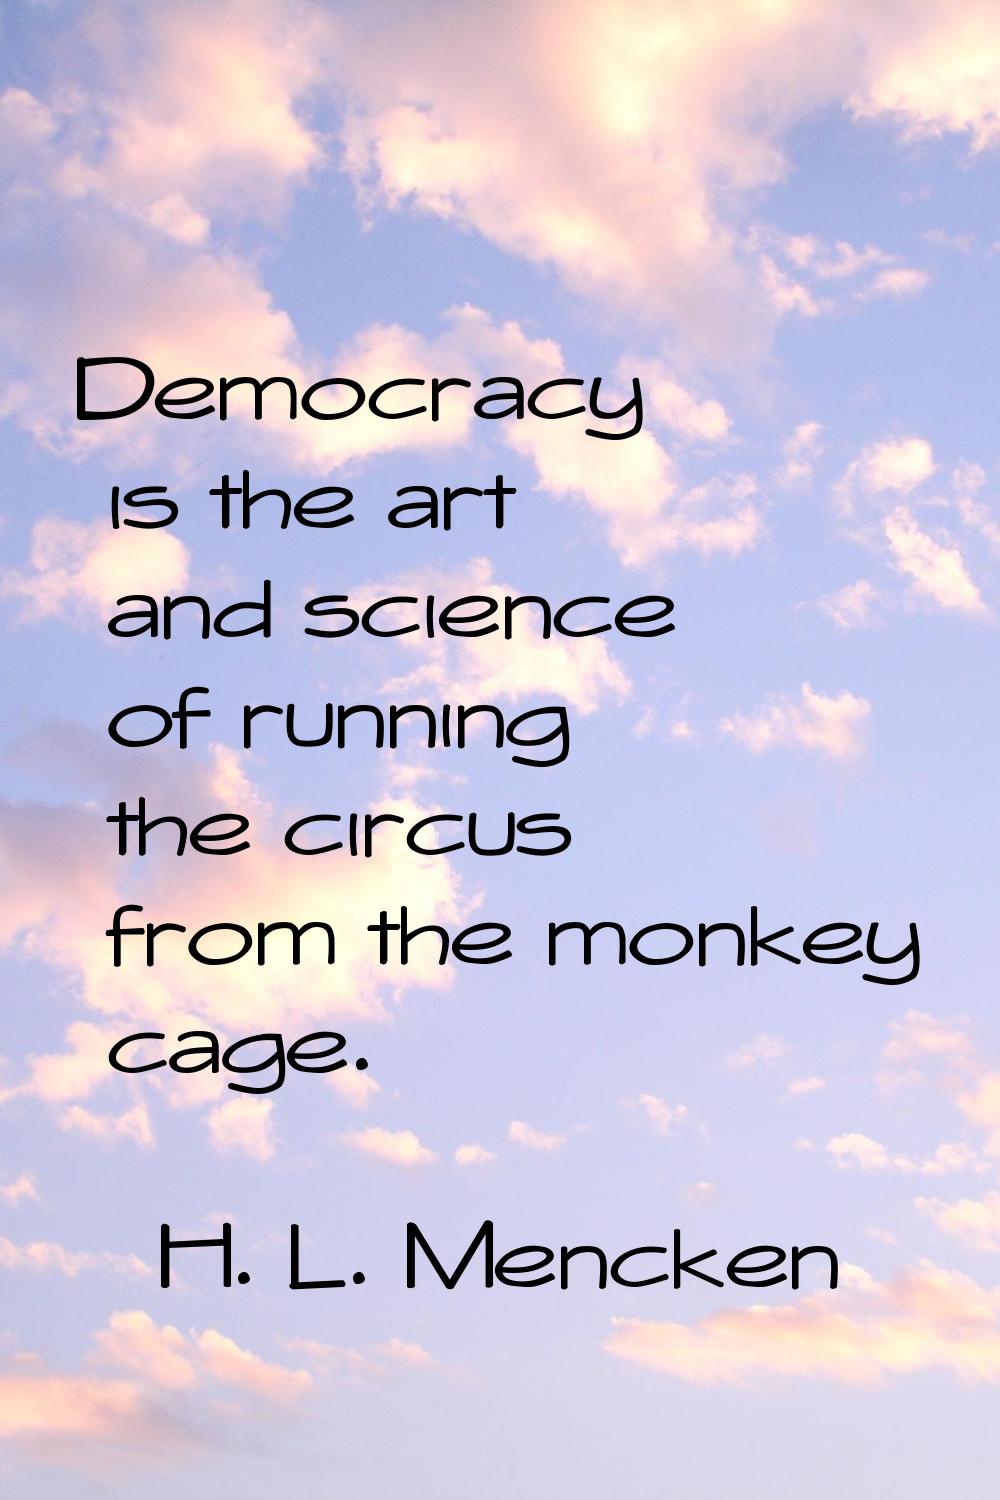 Democracy is the art and science of running the circus from the monkey cage.